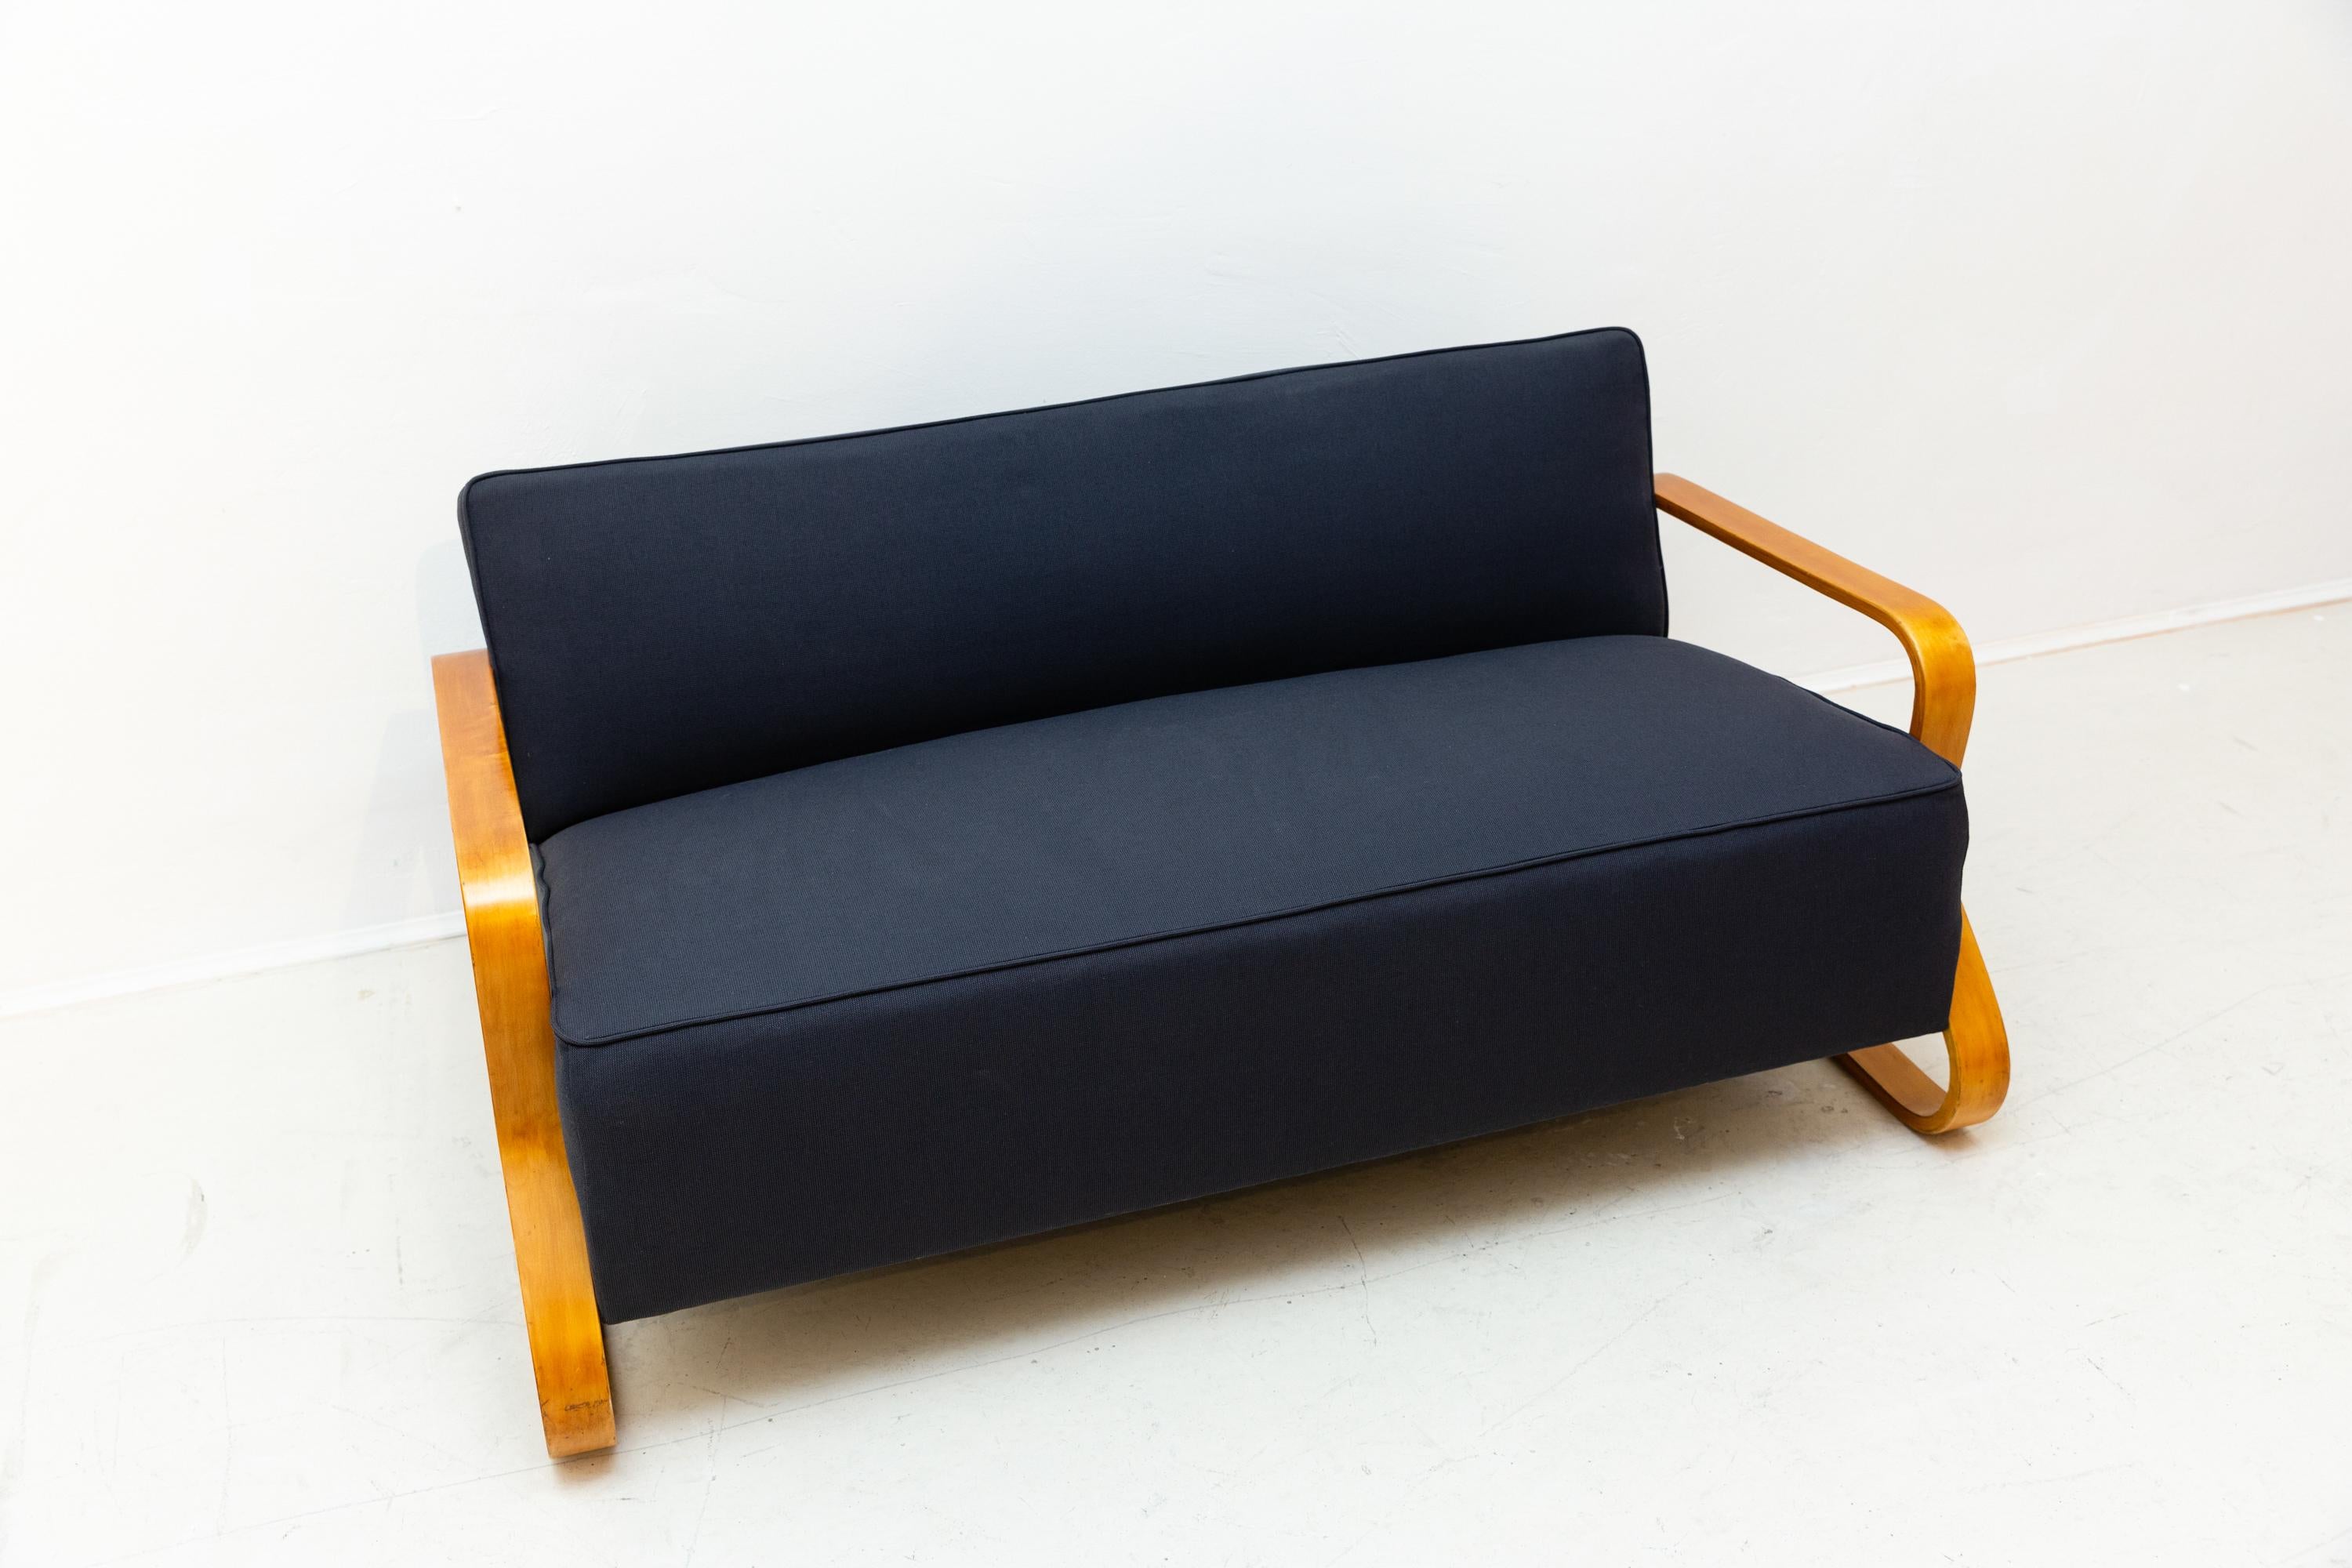 Alvar Aalto (1898-1976), 2-seat sofa model 44, designed 1931/32, manufactured by Finmar. . Wooden frame construction with lacquered birch side panels, vintage spring upholstery, newly textile recovered, dark blue fabric cover. In a very good